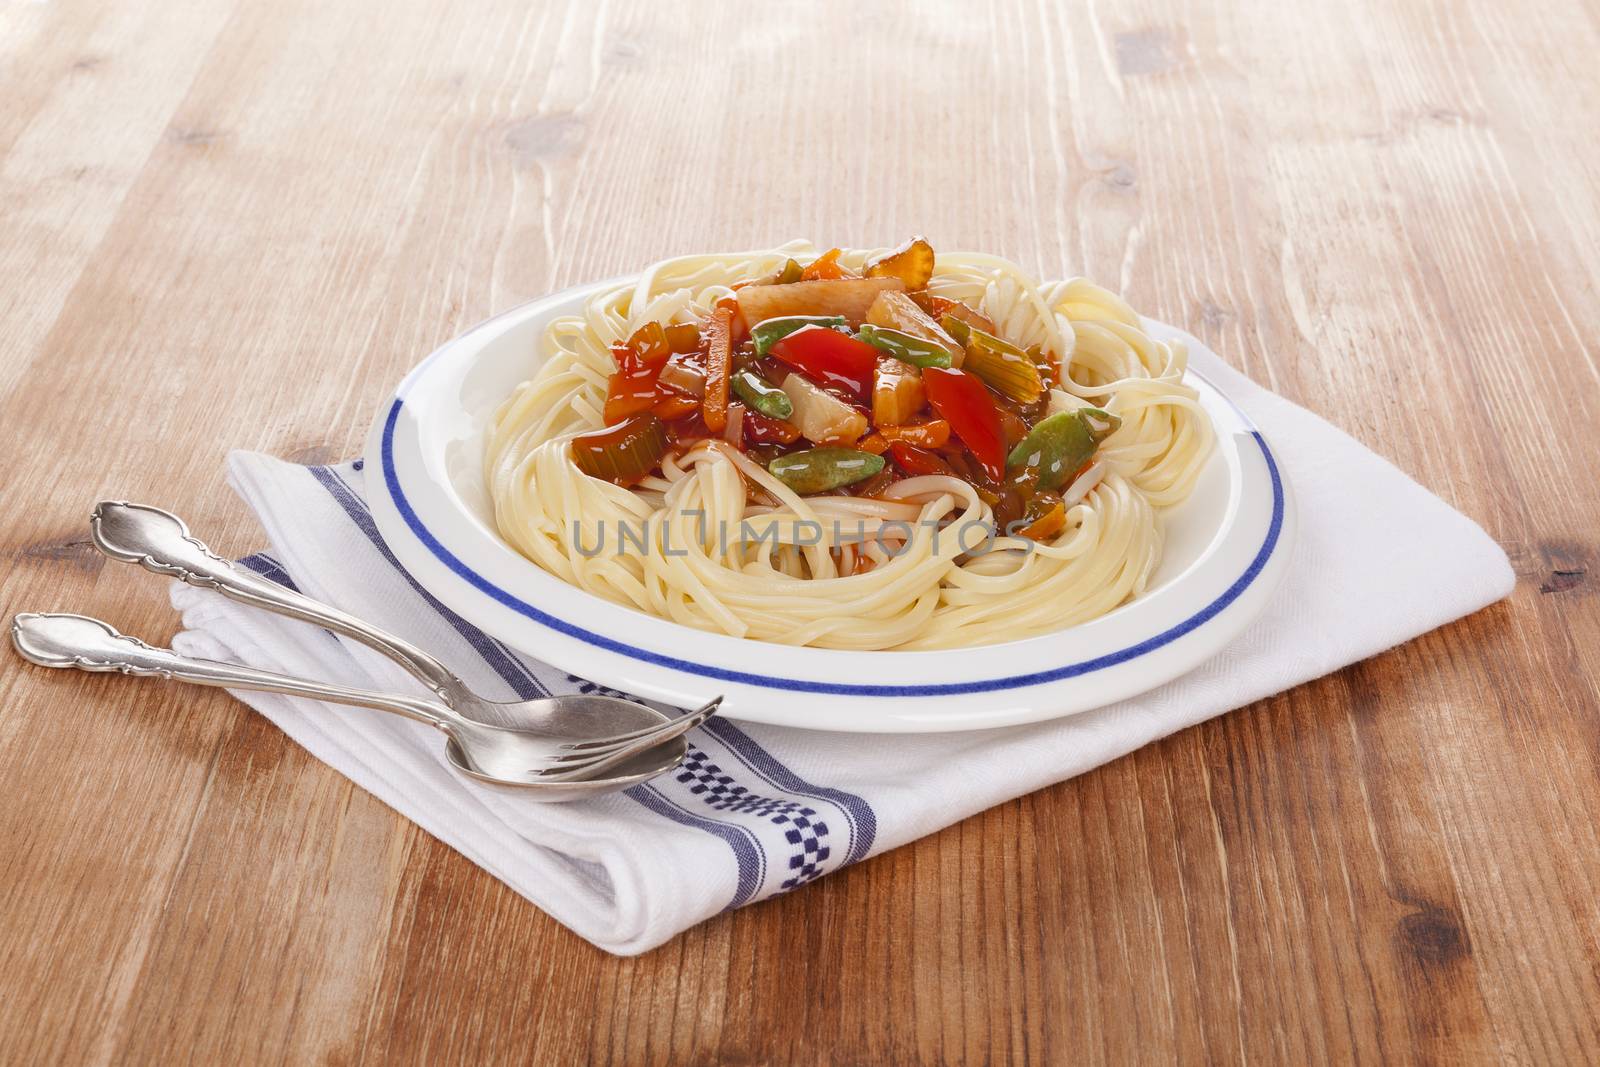 Spaghetti pasta with tomato sauce and steamed vegetables. Healthy pasta eating.